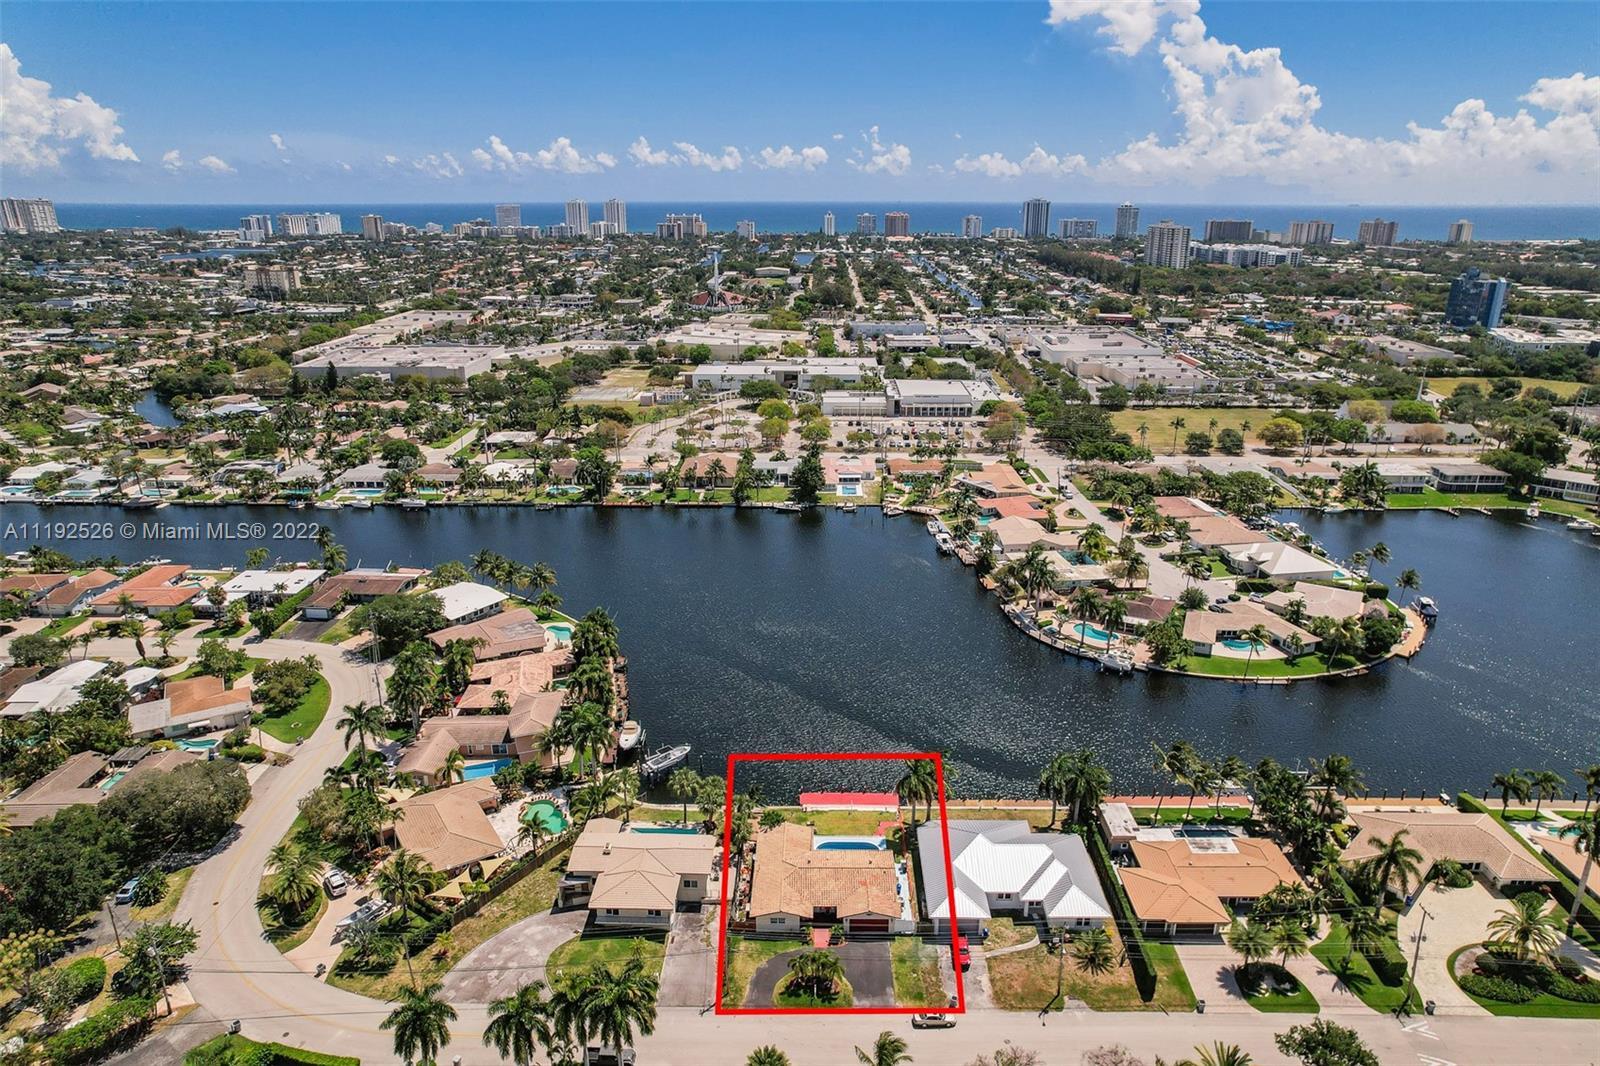 Incredible Opportunity! Boaters Dream, Waterfront home with 1 fixed bridge to deep water ocean access in sought after Cypress lake! Finish and put your own personal touches into your waterfront dream home! Beautiful Million Dollar waterfront lot with extraordinary views! 75 Ft of frontage! Close to the beach, down the street from US1, restaurants, shopping, and all that Pompano Beach has to offer!